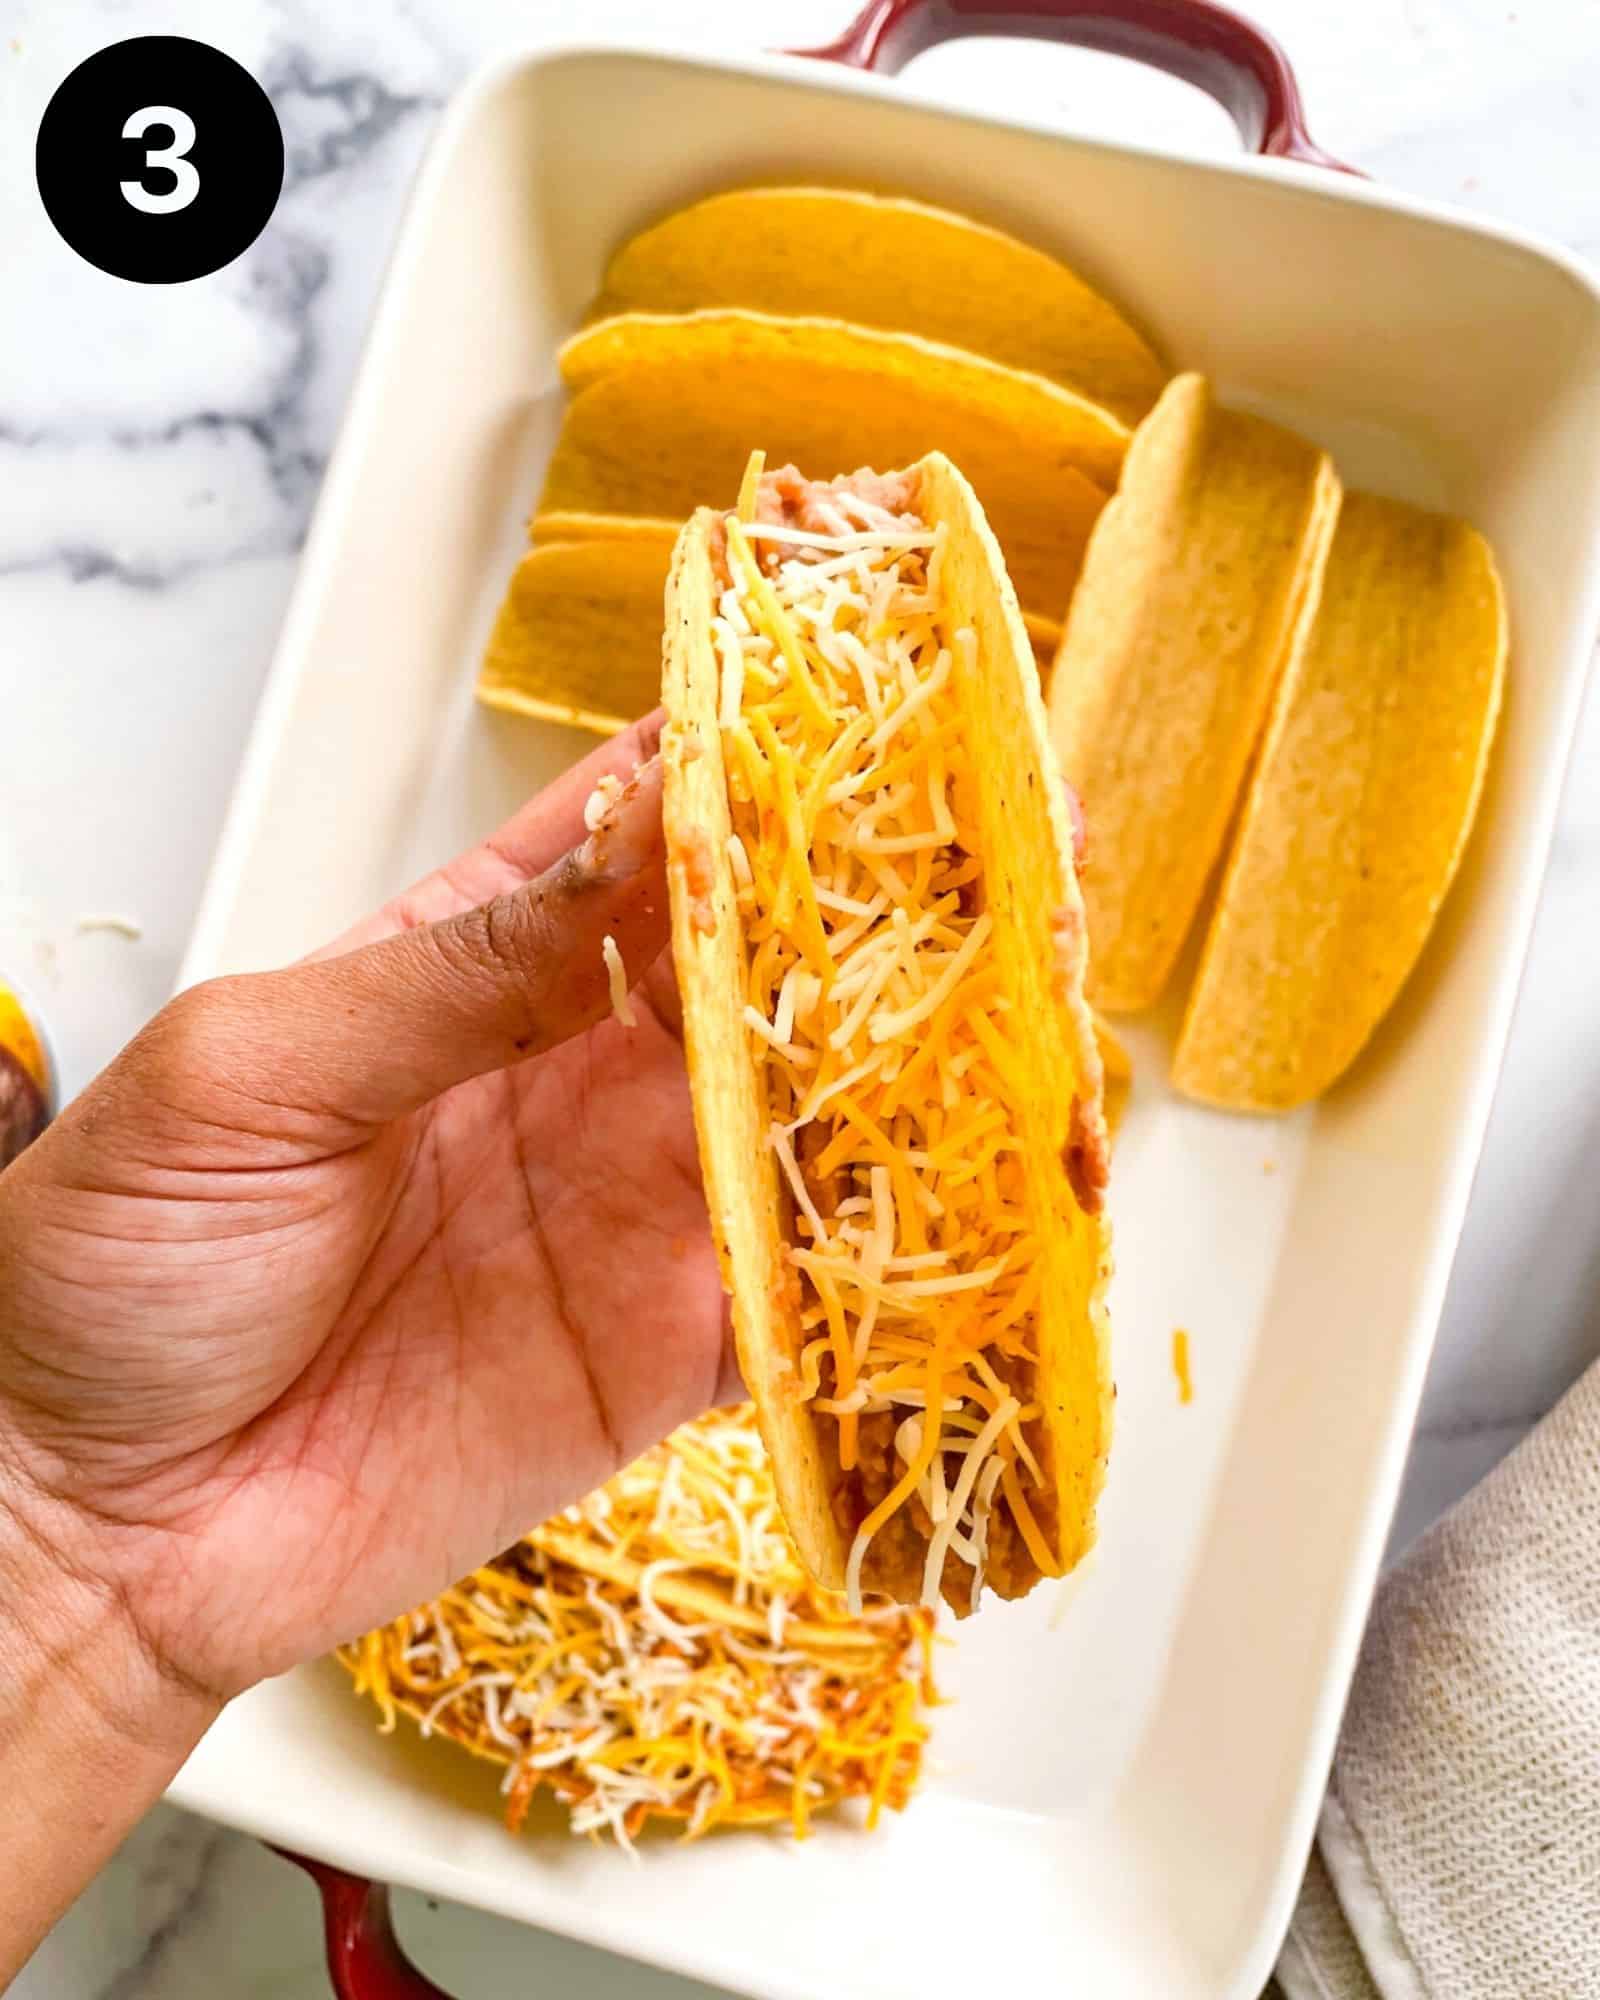 a hand holding a hard taco shell stuffed with cheese and refried beans.